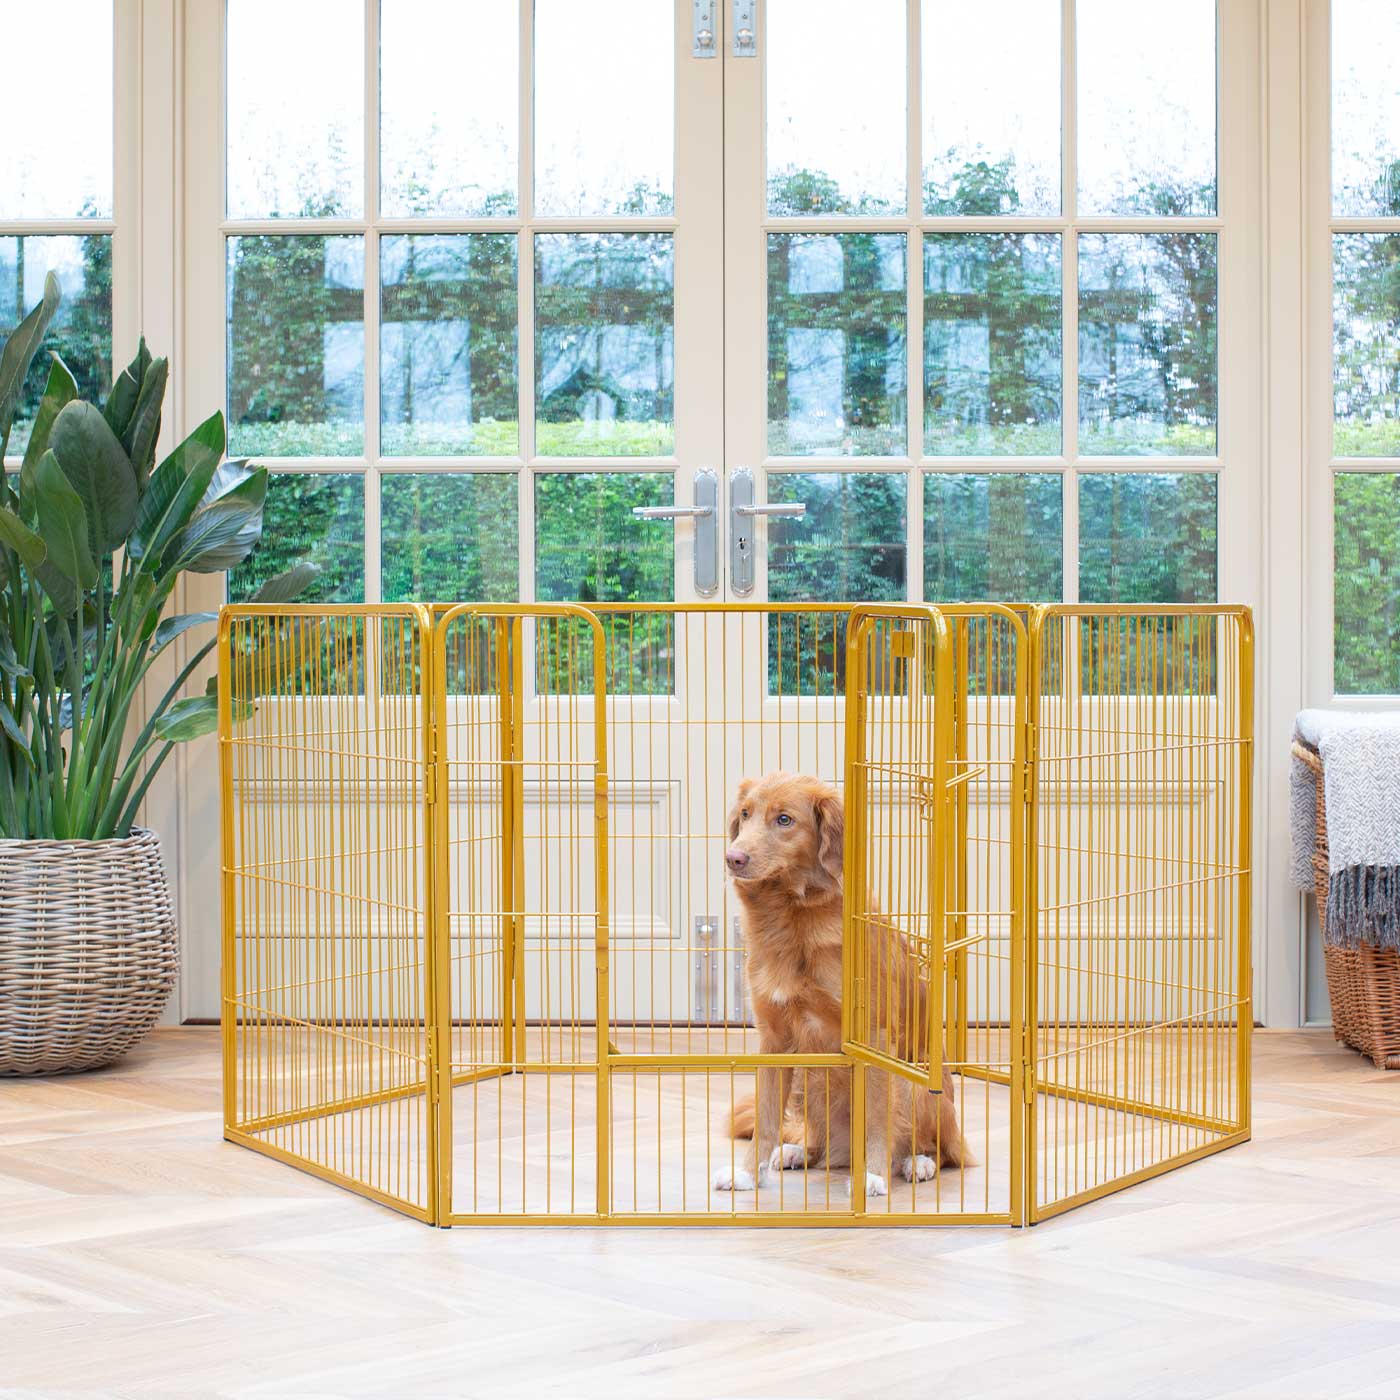 Ensure The Ultimate Puppy Safety with Our Heavy Duty 80cm High Gold Metal Play Pen, Crafted to Take Your Pet Right Through Maturity! Powder Coated to Be Extra Hardwearing! 6 panels that are 80cm high and attachments to connect to any crate. The modular system allows you to change the puppy pen shape with multiple layouts! Available To Now at Lords & Labradors 